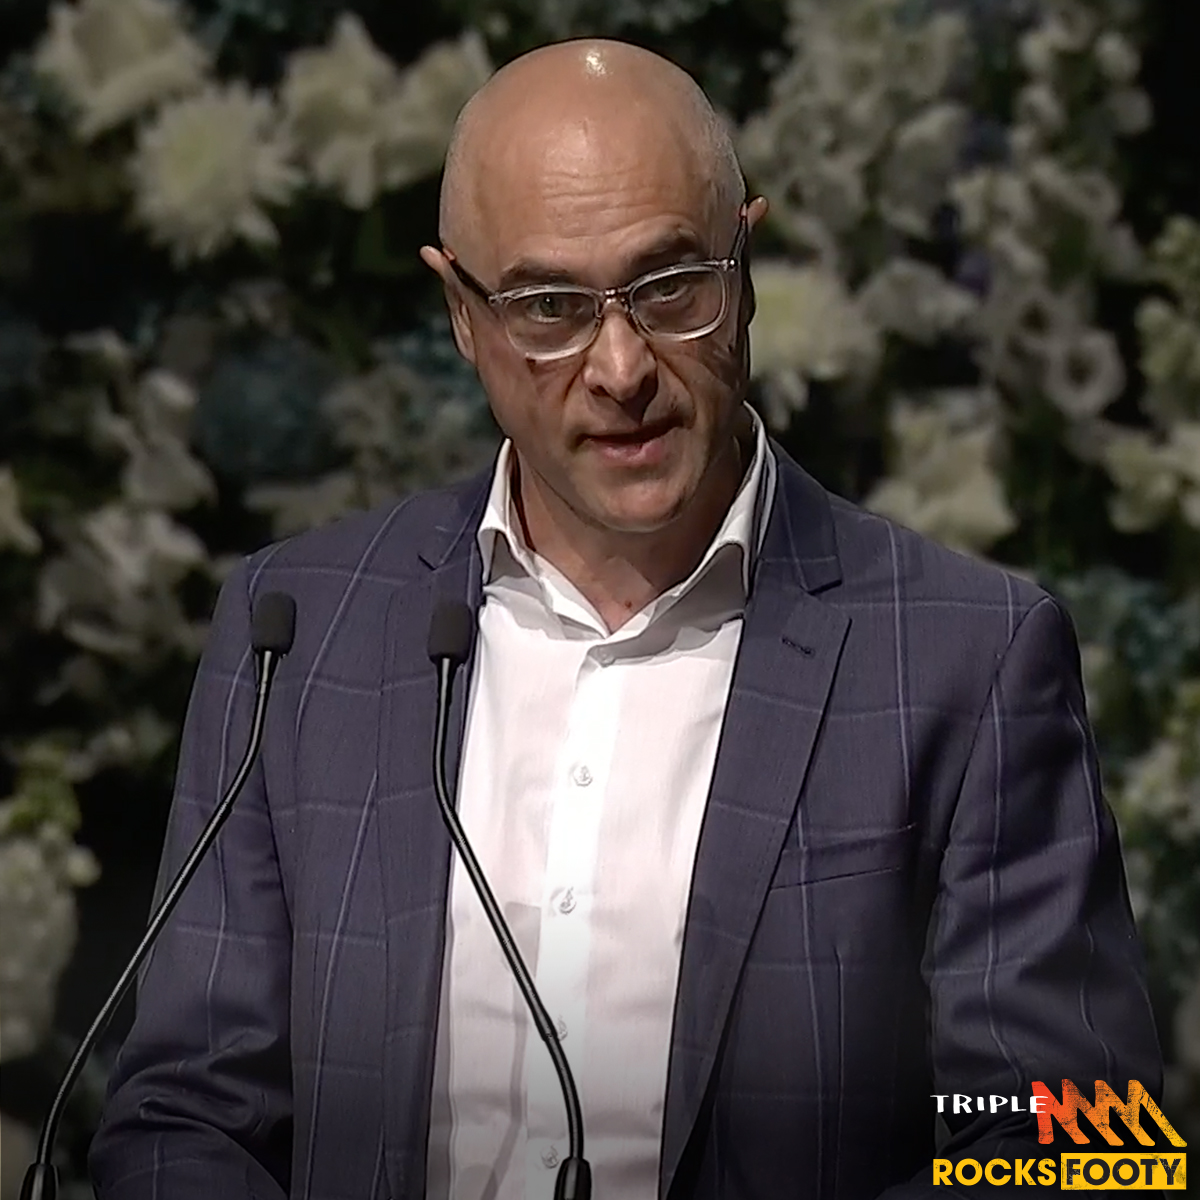 Wayne Schwass's emotional speech at Danny Frawley's funeral about taking care of yourself and your mates